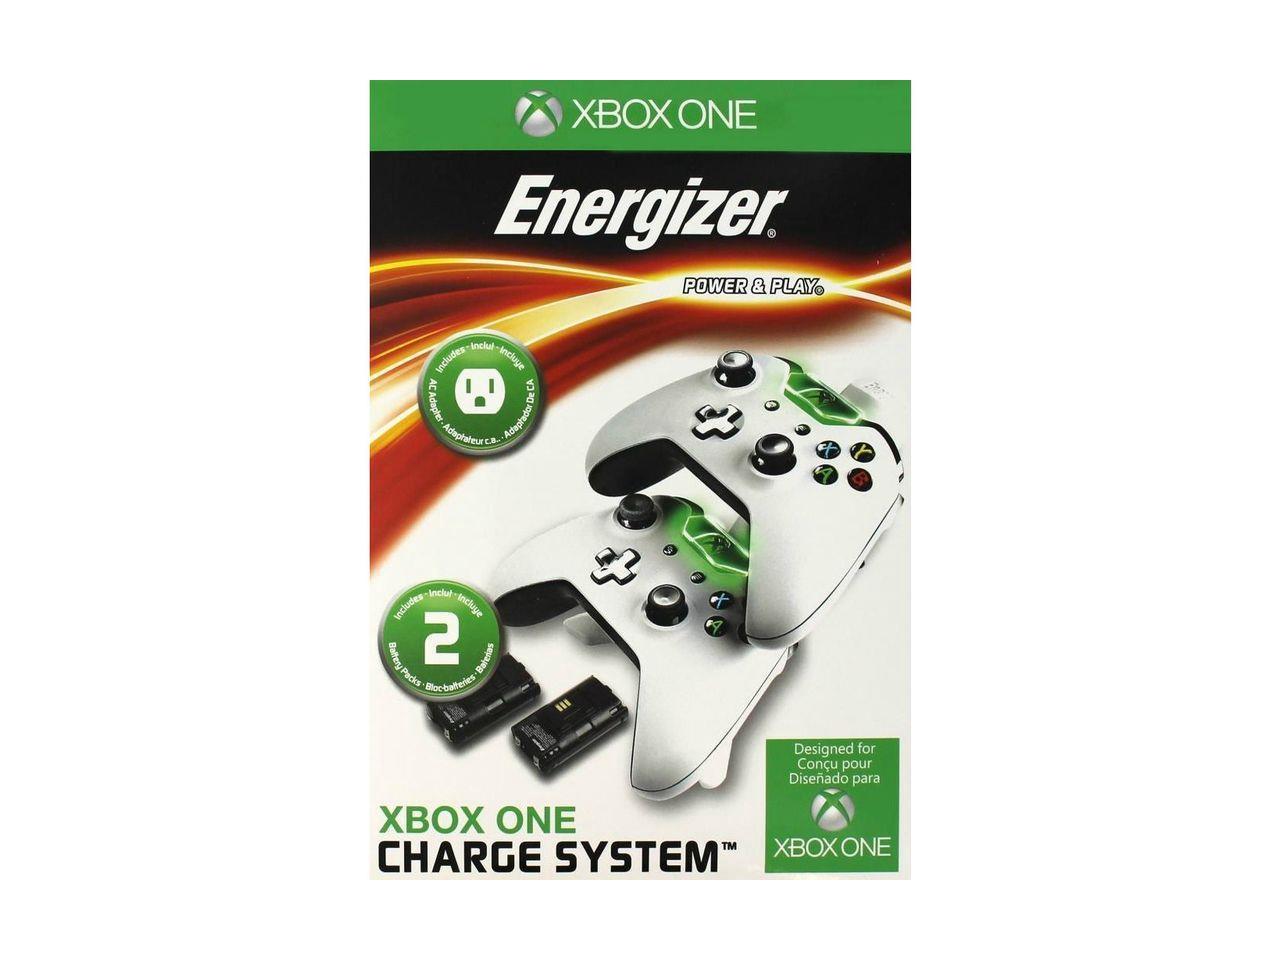 xbox one energizer play and charge kit